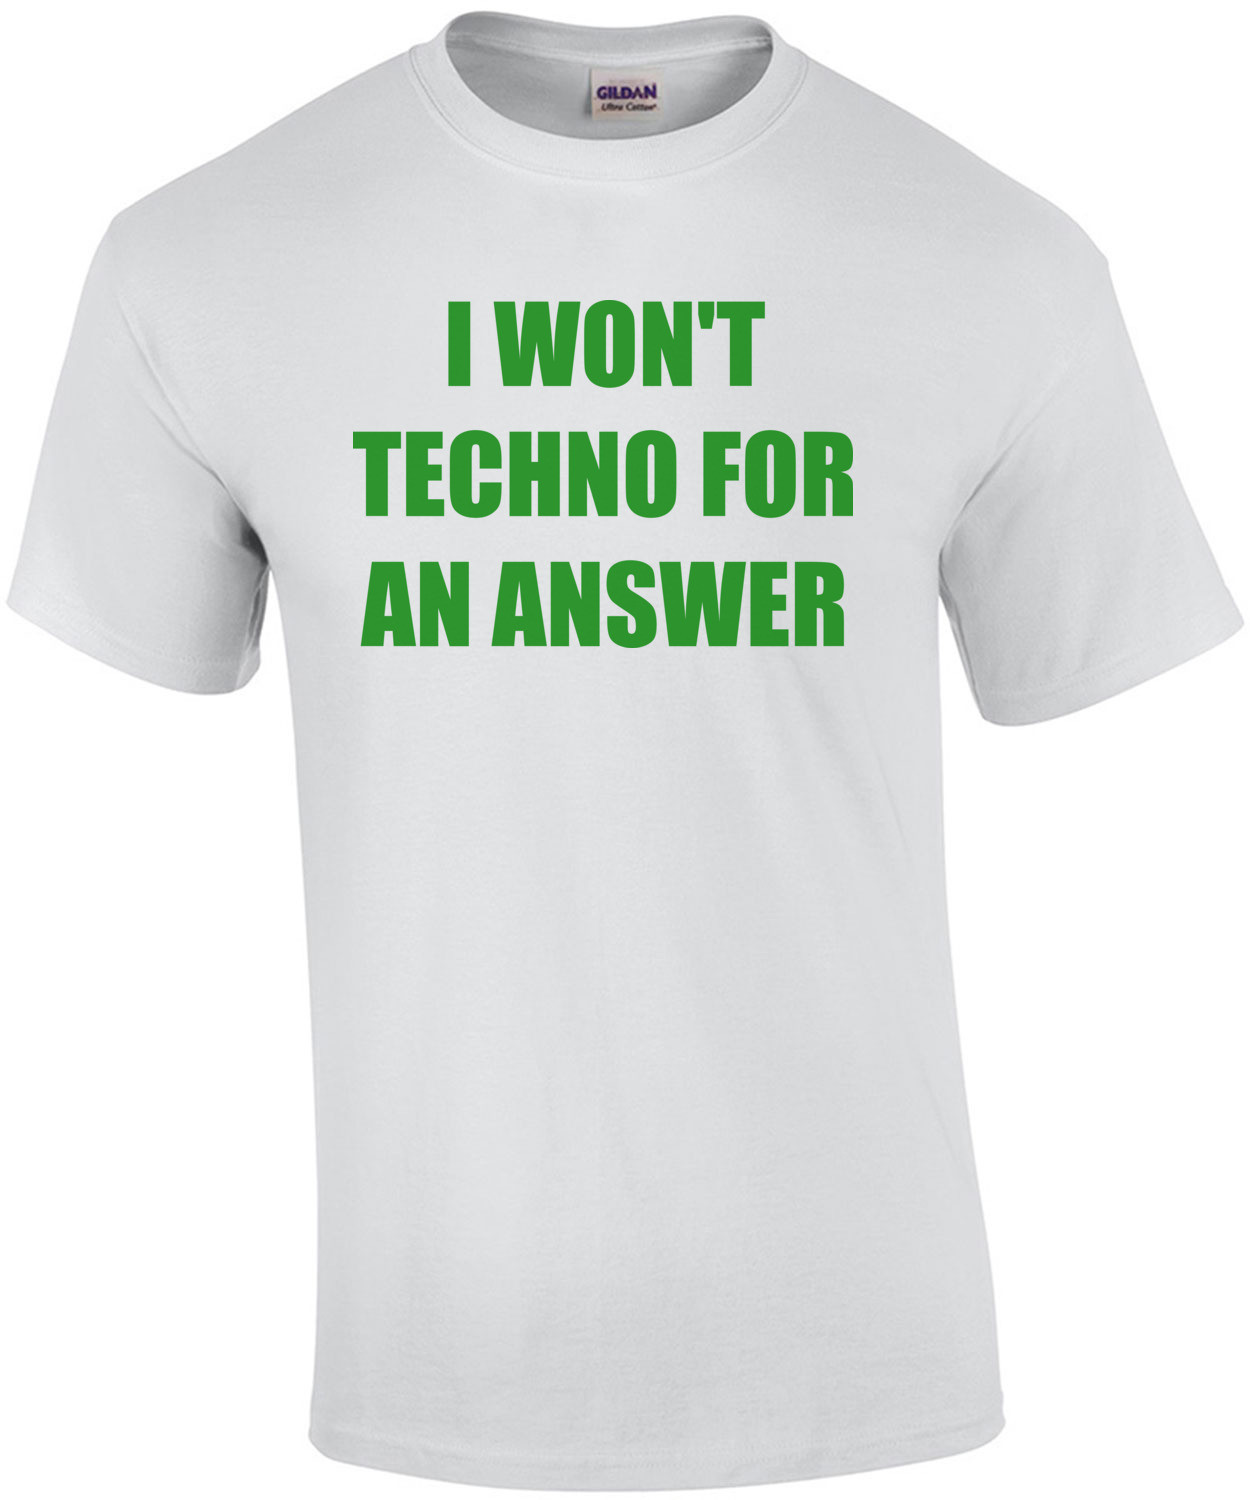 I WON'T TECHNO FOR AN ANSWER funny  Shirt